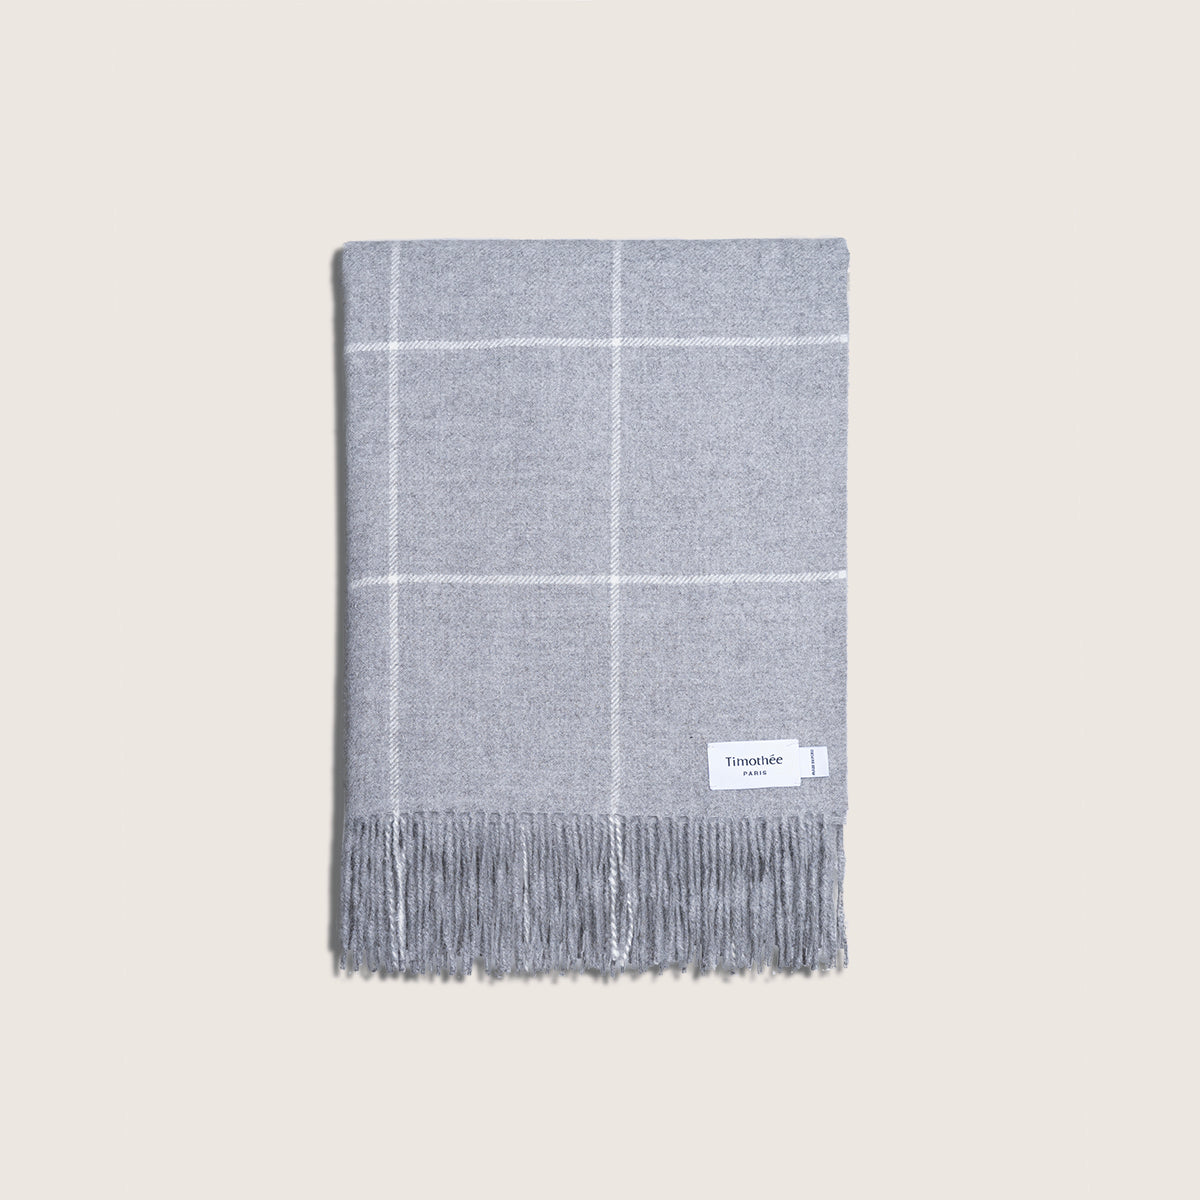 light-grey alpaca blanket by french-lifestyle brand timothee paris front view